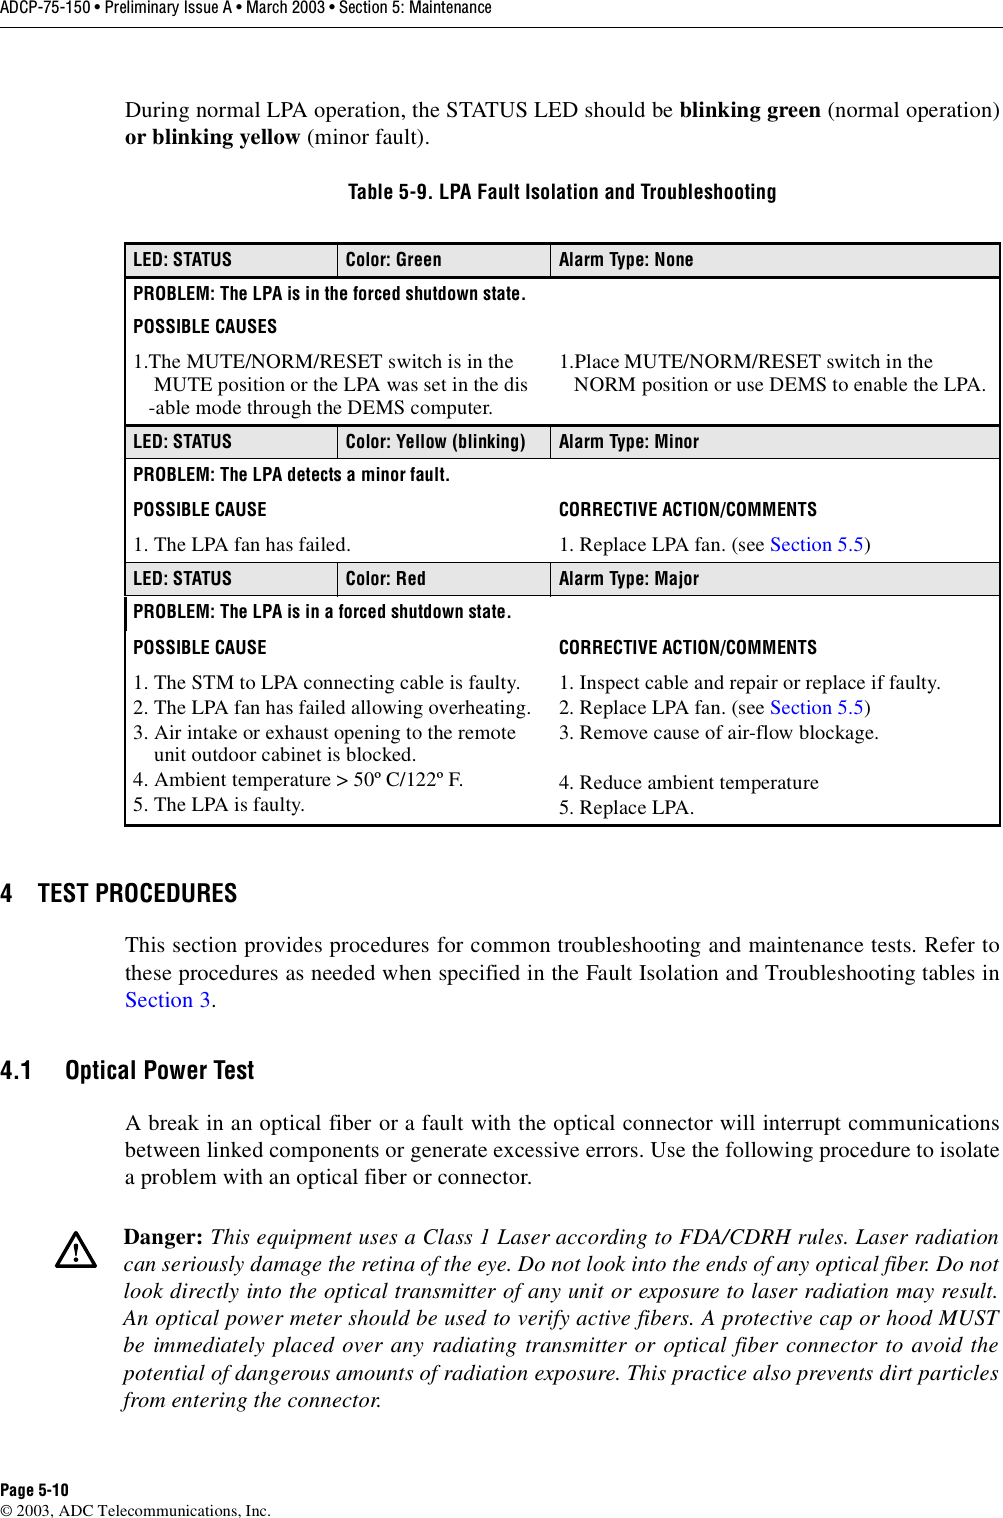 ADCP-75-150 • Preliminary Issue A • March 2003 • Section 5: MaintenancePage 5-10©2003, ADC Telecommunications, Inc.During normal LPA operation, the STATUS LED should be blinking green (normal operation)or blinking yellow (minor fault).4 TEST PROCEDURESThis section provides procedures for common troubleshooting and maintenance tests. Refer tothese procedures as needed when specified in the Fault Isolation and Troubleshooting tables inSection 3.4.1 Optical Power TestAbreak in an optical fiber or afault with the optical connector will interrupt communicationsbetween linked components or generate excessive errors. Use the following procedure to isolateaproblem with an optical fiber or connector.Table 5-9. LPA Fault Isolation and TroubleshootingLED: STATUS Color: Green Alarm Type: NonePROBLEM: The LPA is in the forced shutdown state.POSSIBLE CAUSES1.The MUTE/NORM/RESET switch is in theMUTE position or the LPA was set in the dis-able mode through the DEMS computer.1.Place MUTE/NORM/RESET switch in theNORM position or use DEMS to enable the LPA.LED: STATUS Color: Yellow (blinking) Alarm Type: MinorPROBLEM: The LPA detects a minor fault. POSSIBLE CAUSE CORRECTIVE ACTION/COMMENTS1. The LPA fan has failed. 1. Replace LPA fan. (see Section 5.5)LED: STATUS Color: Red Alarm Type: MajorPROBLEM: The LPA is in a forced shutdown state.POSSIBLE CAUSE CORRECTIVE ACTION/COMMENTS1. The STM to LPA connecting cable is faulty.2. The LPA fan has failed allowing overheating.3. Air intake or exhaust opening to the remoteunit outdoor cabinet is blocked.4. Ambient temperature &gt;50º C/122º F.5. The LPA is faulty.1. Inspect cable and repair or replace if faulty.2. Replace LPA fan. (see Section 5.5)3. Remove cause of air-flow blockage.4. Reduce ambient temperature5. Replace LPA.Danger: This equipment uses aClass 1Laser according to FDA/CDRH rules. Laser radiationcan seriously damage the retina of the eye. Do not look into the ends of any optical fiber. Do notlook directly into the optical transmitter of any unit or exposure to laser radiation may result.An optical power meter should be used to verify active fibers. Aprotective cap or hood MUSTbe immediately placed over any radiating transmitter or optical fiber connector to avoid thepotential of dangerous amounts of radiation exposure. This practice also prevents dirt particlesfrom entering the connector.